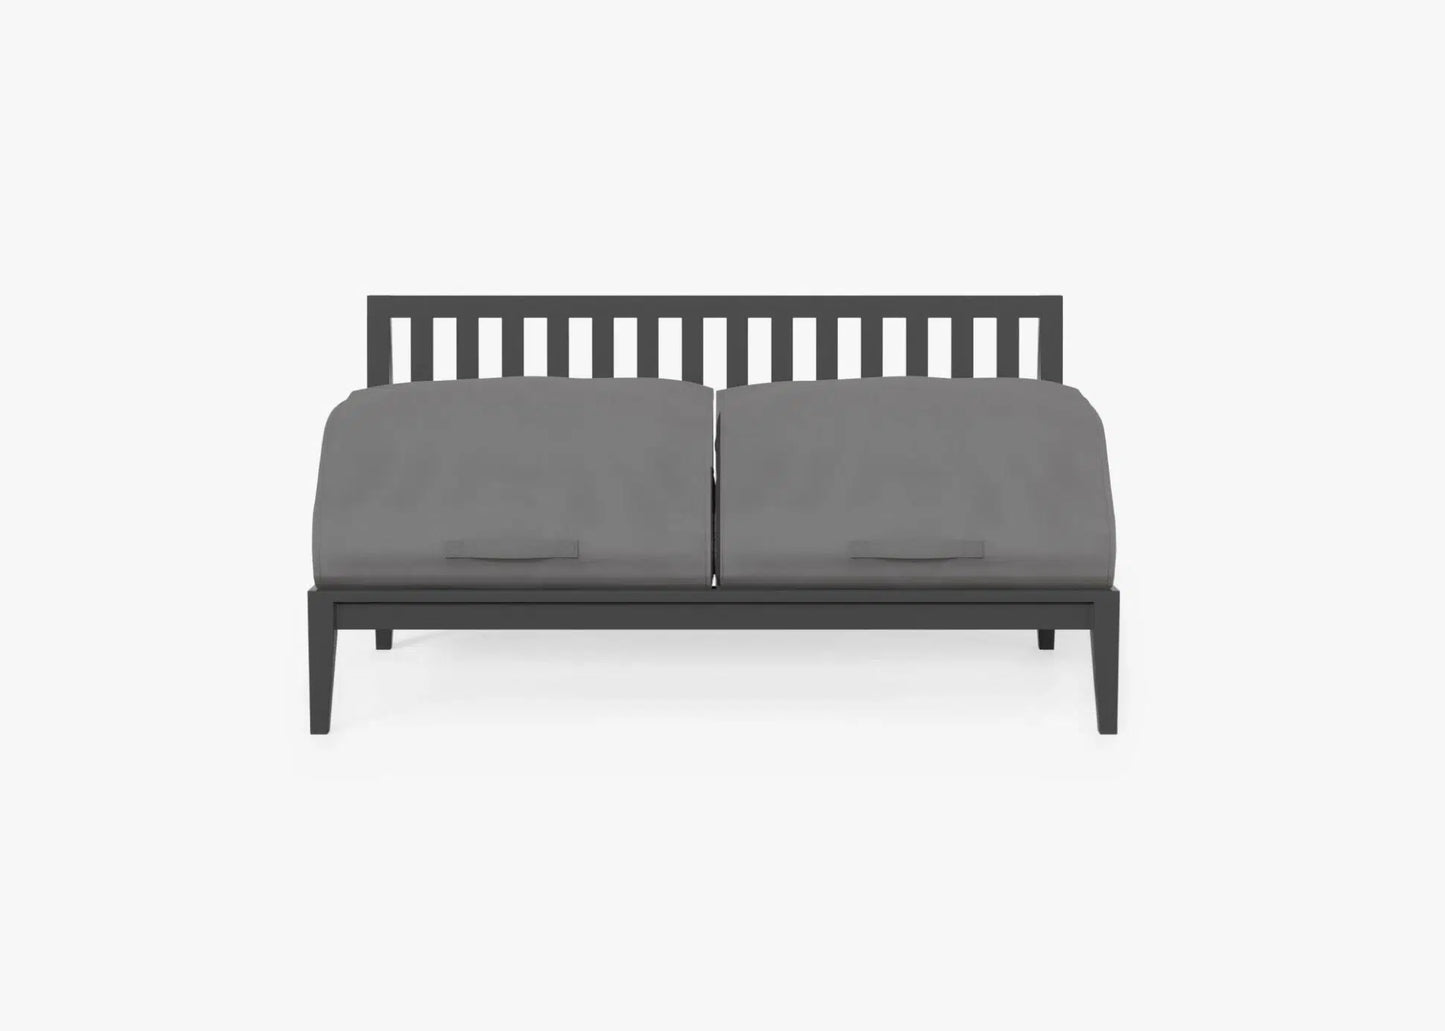 Live Outer 58" Charcoal Aluminum Outdoor Armless Loveseat With Dark Pebble Gray Cushion